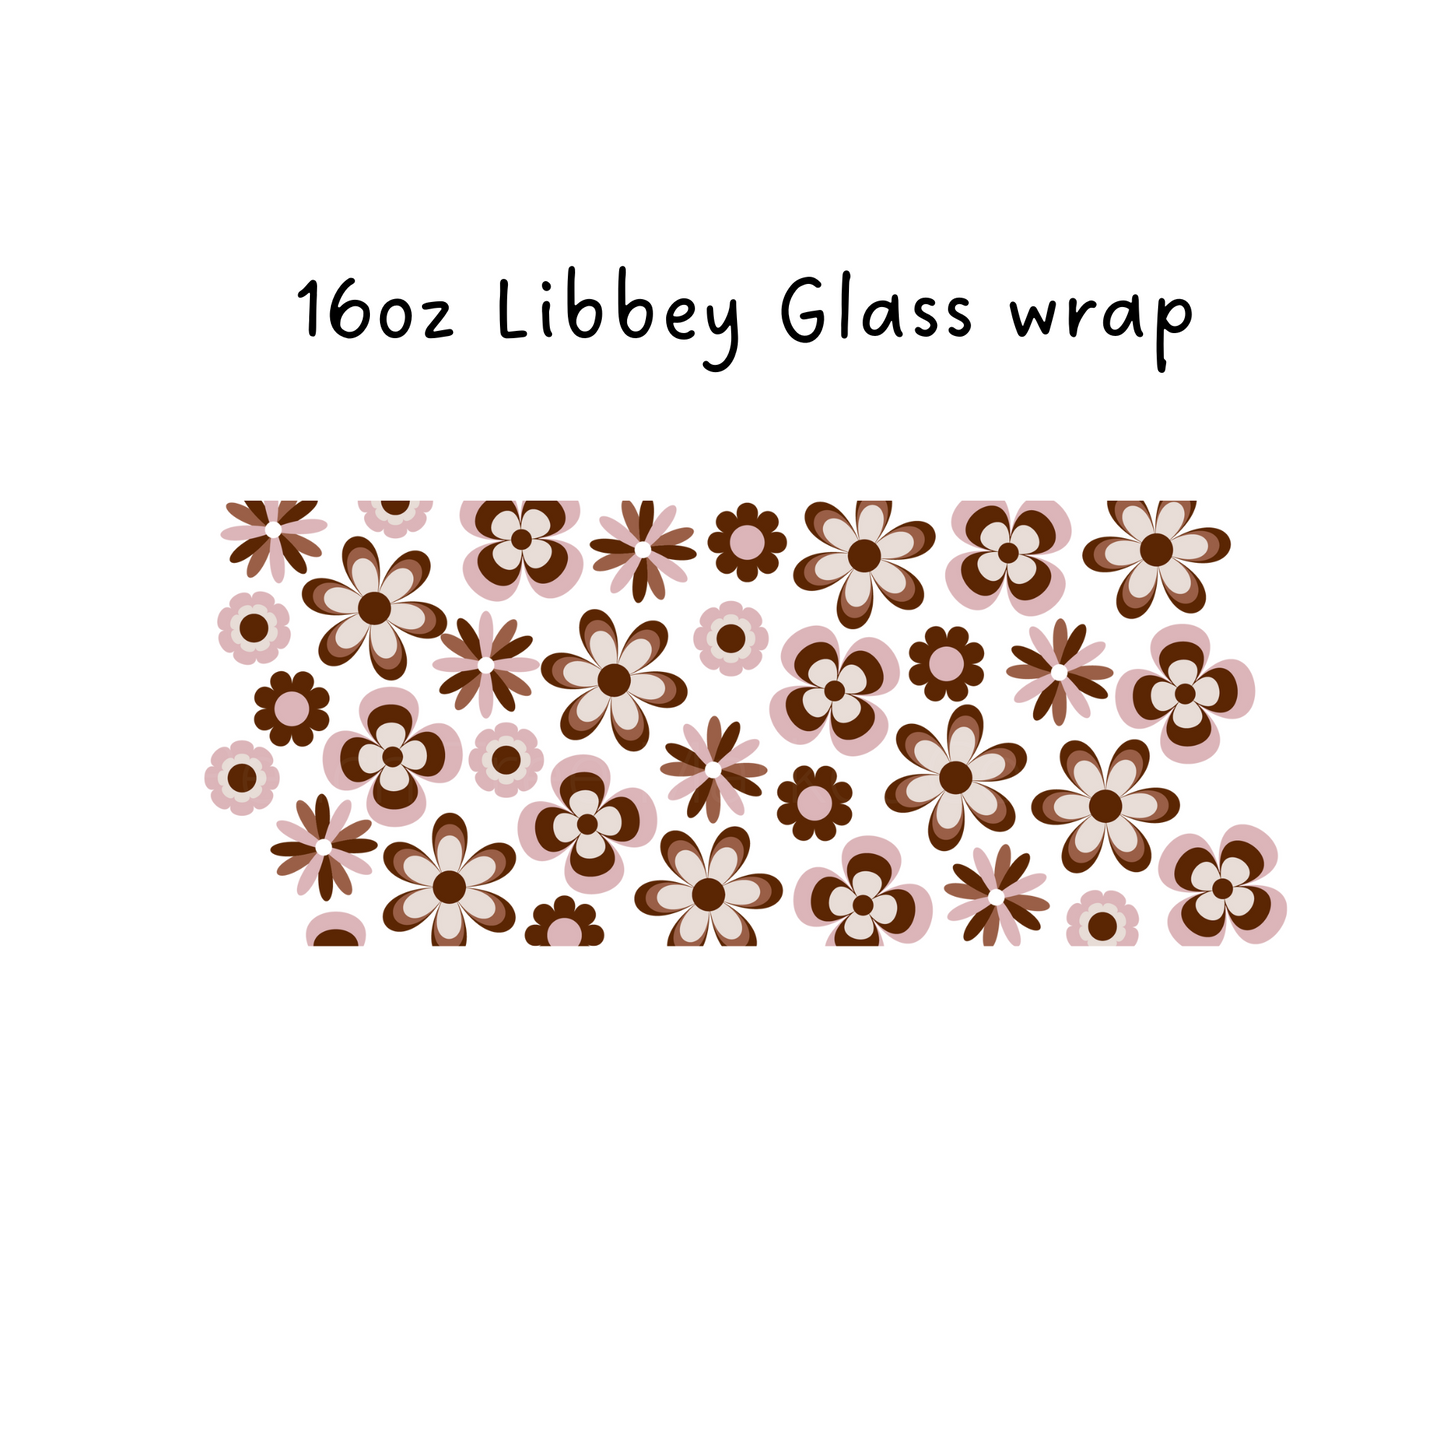 Brown Retro Flowers 16 Oz Libbey Beer Glass Wrap